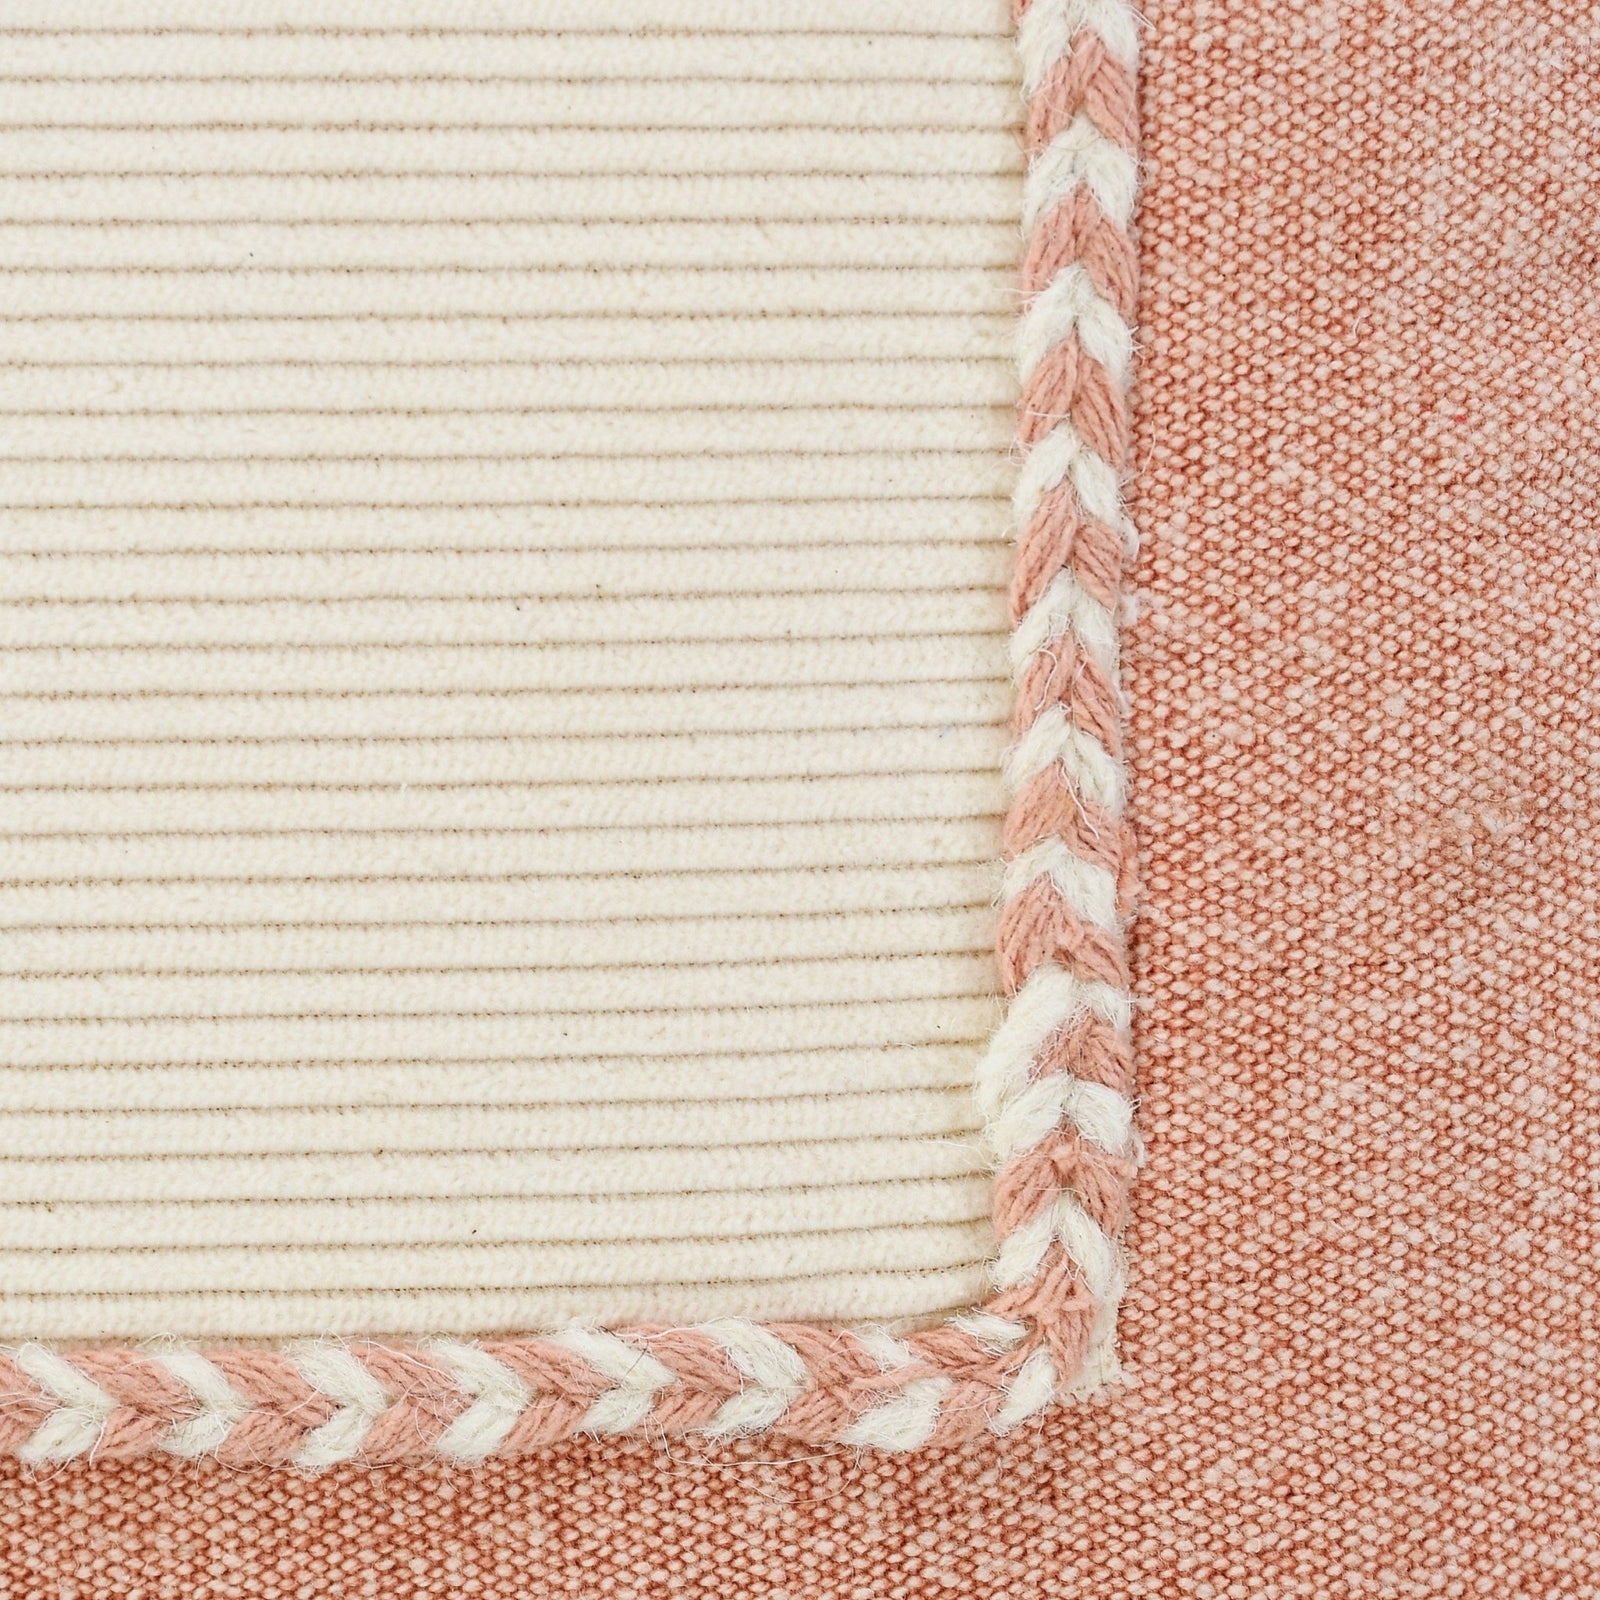 Riviera Lr07702 Dusty Pink/Cream Pillow - Rug & Home